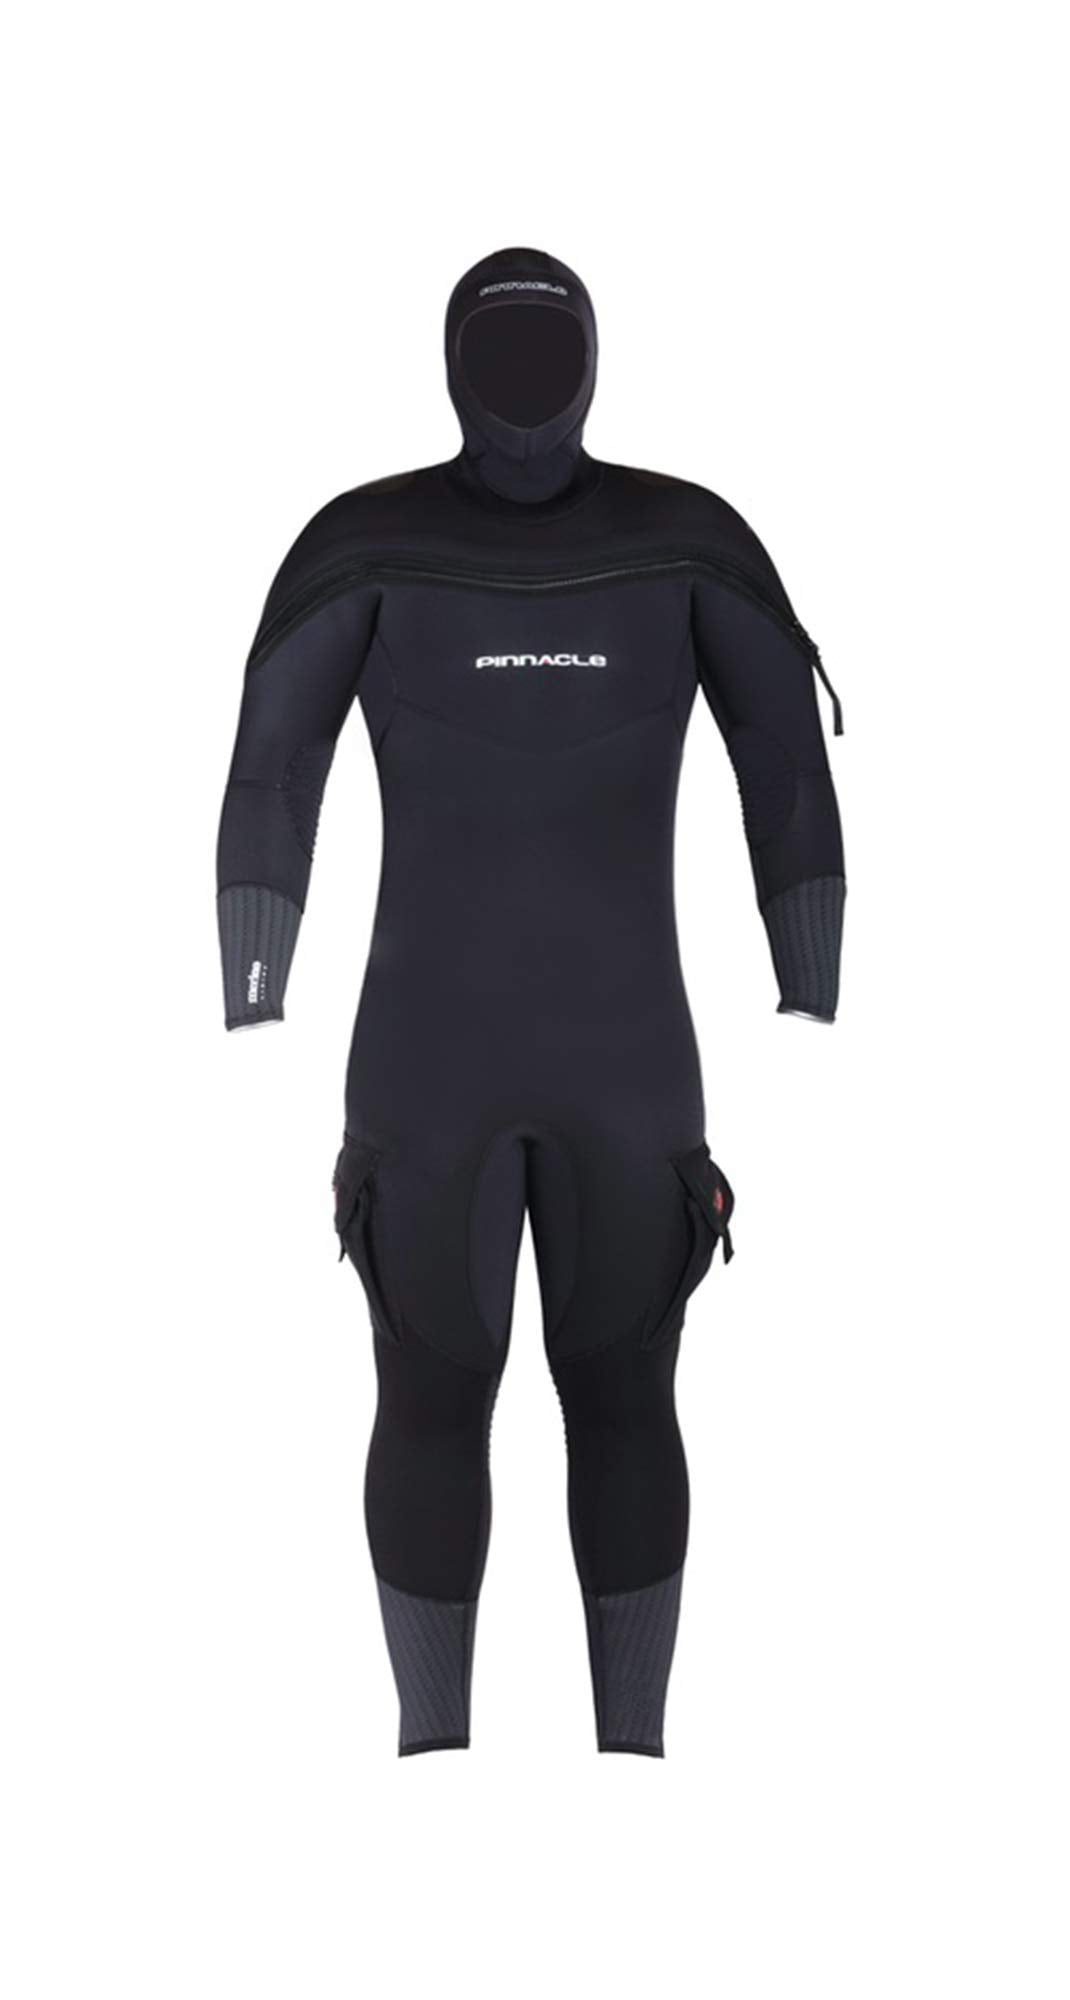 Details about   New Men 5mm Neoprene Warm Hooded Diving Suit Snorkeling Scuba Fishing Wetsuits 